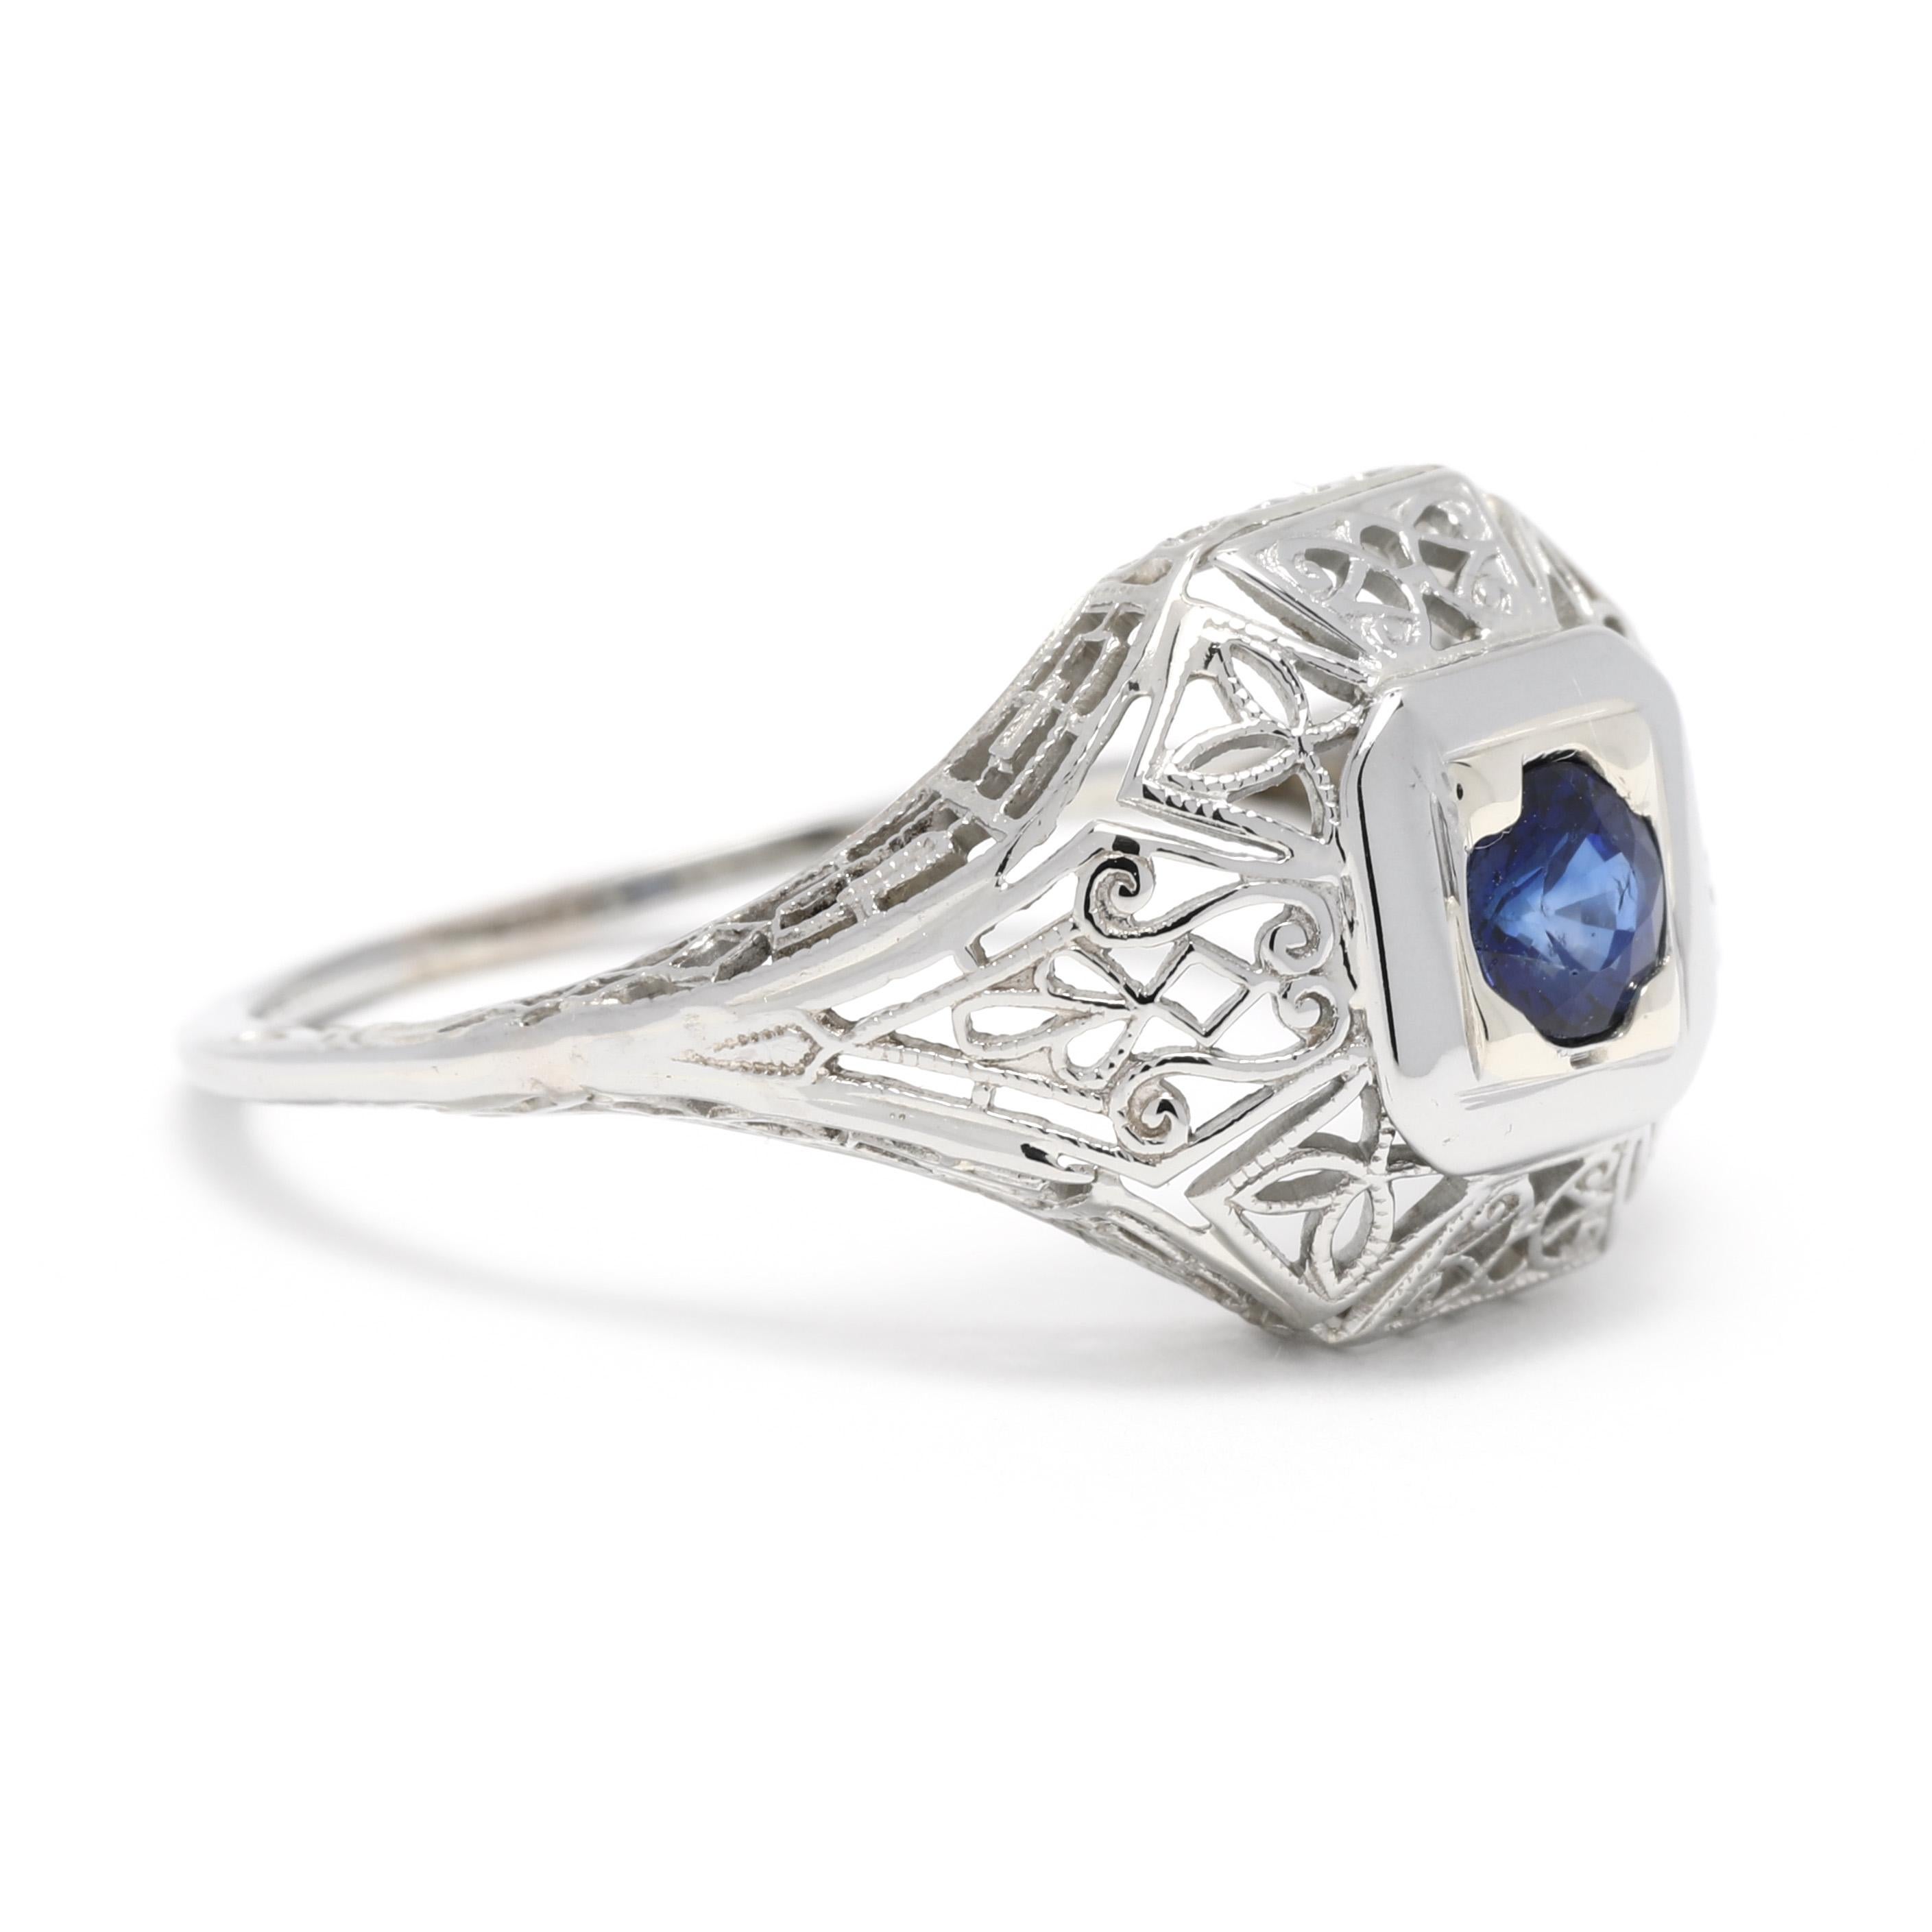 An Art Deco 14 karat white gold sapphire filigree cocktail ring. This September birthstone ring features a tapered design with a square set, round cut sapphire weighing approximately .35 carat, with a floral filigree design.

Stones: 
- sapphire, 1